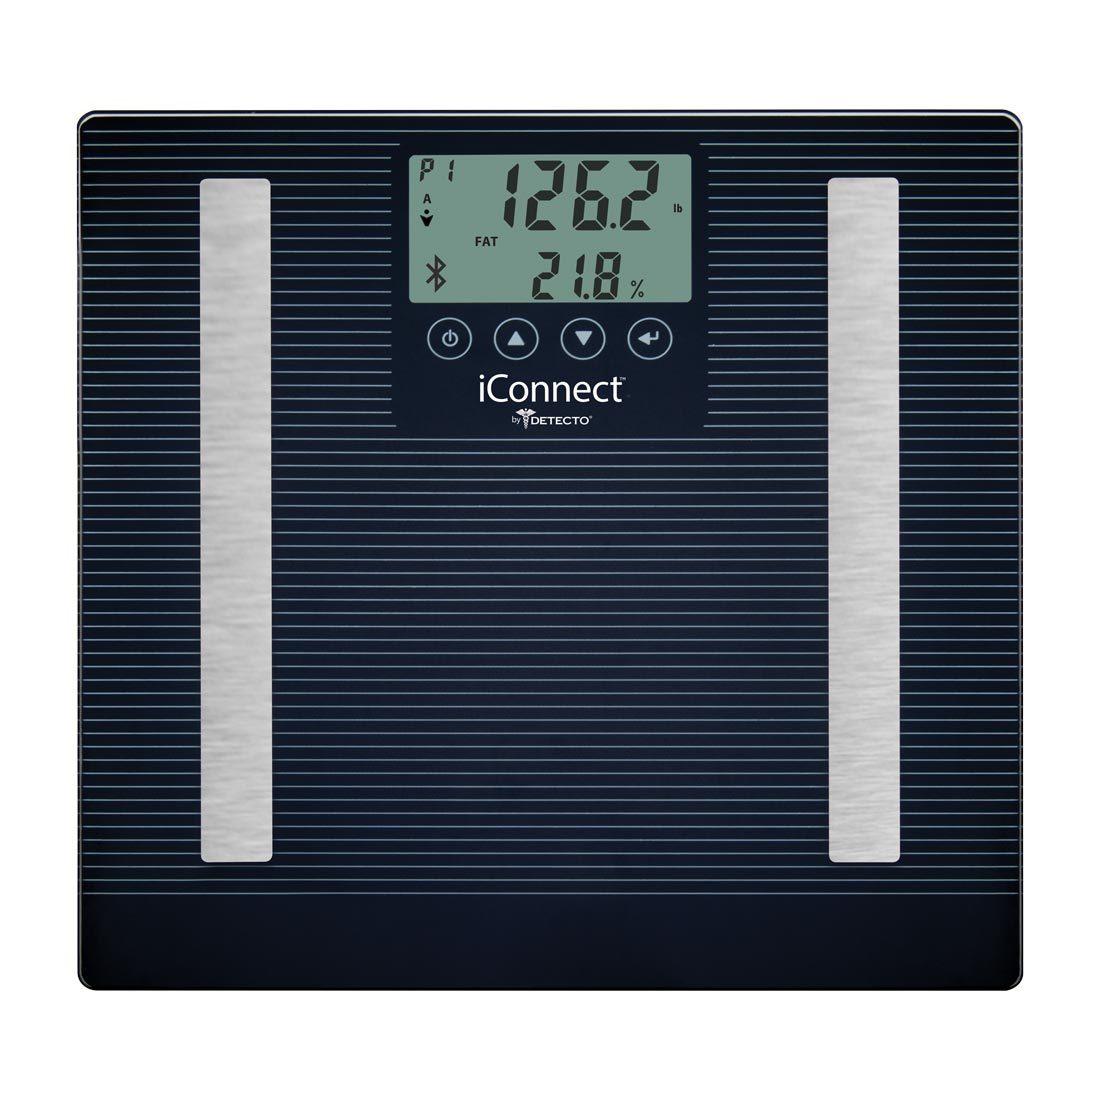 D303 Iconnect Bluetooth Connected Body Fat Scale